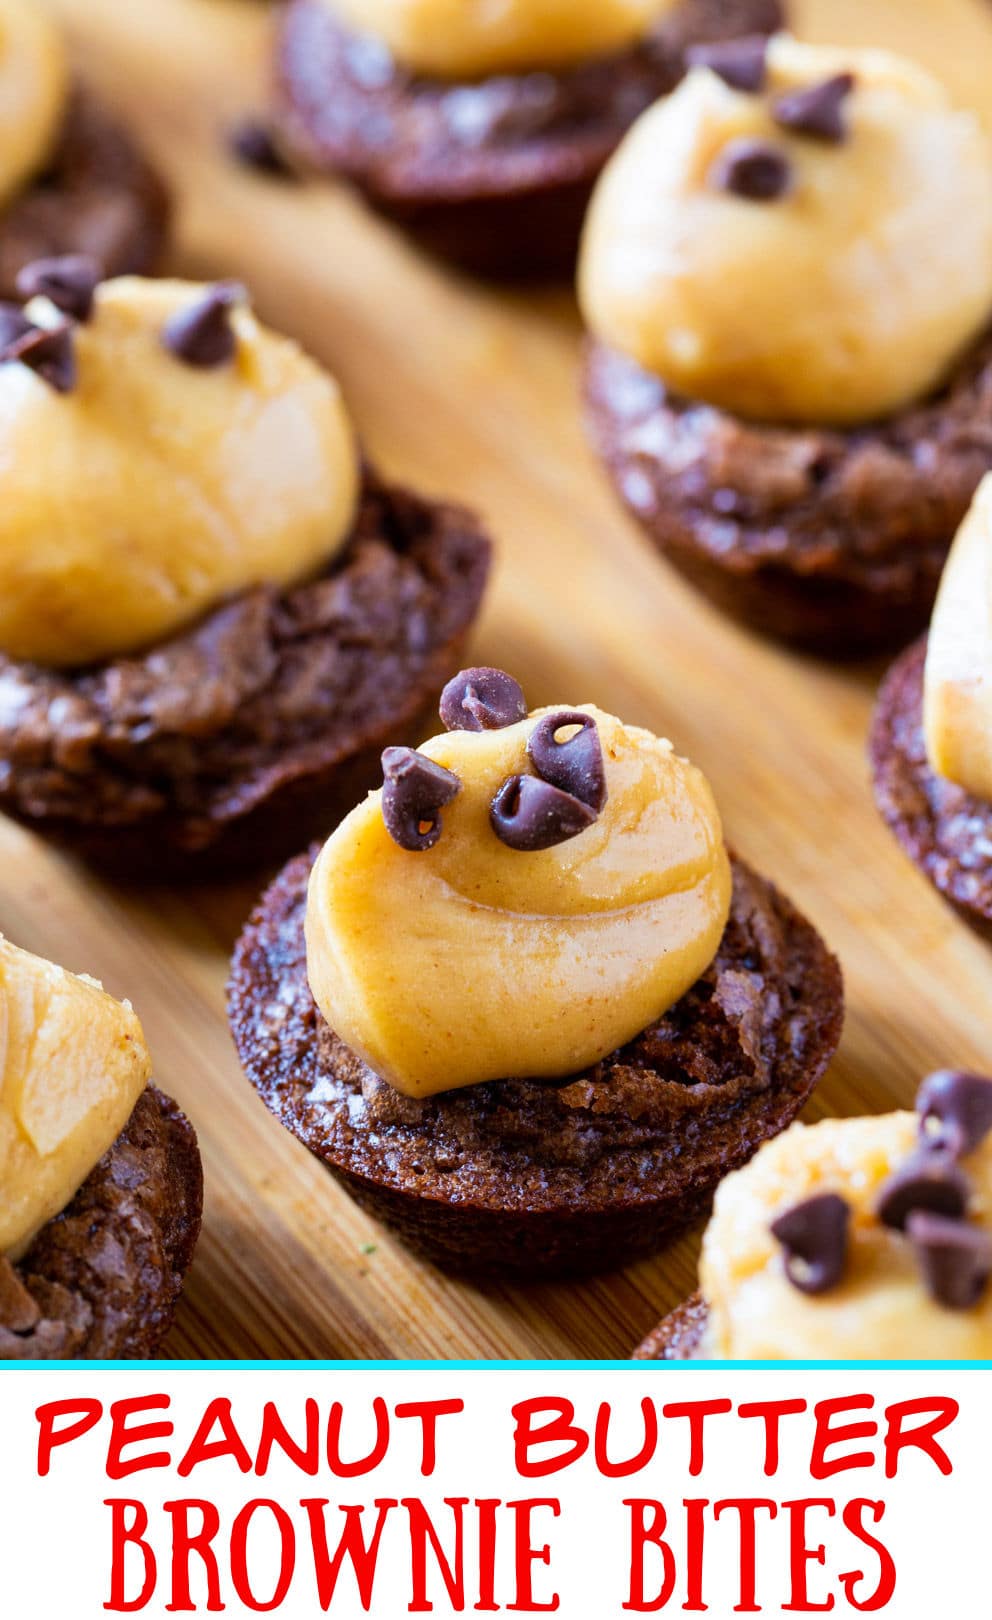 Peanut Butter Brownie Bites on a wood board.